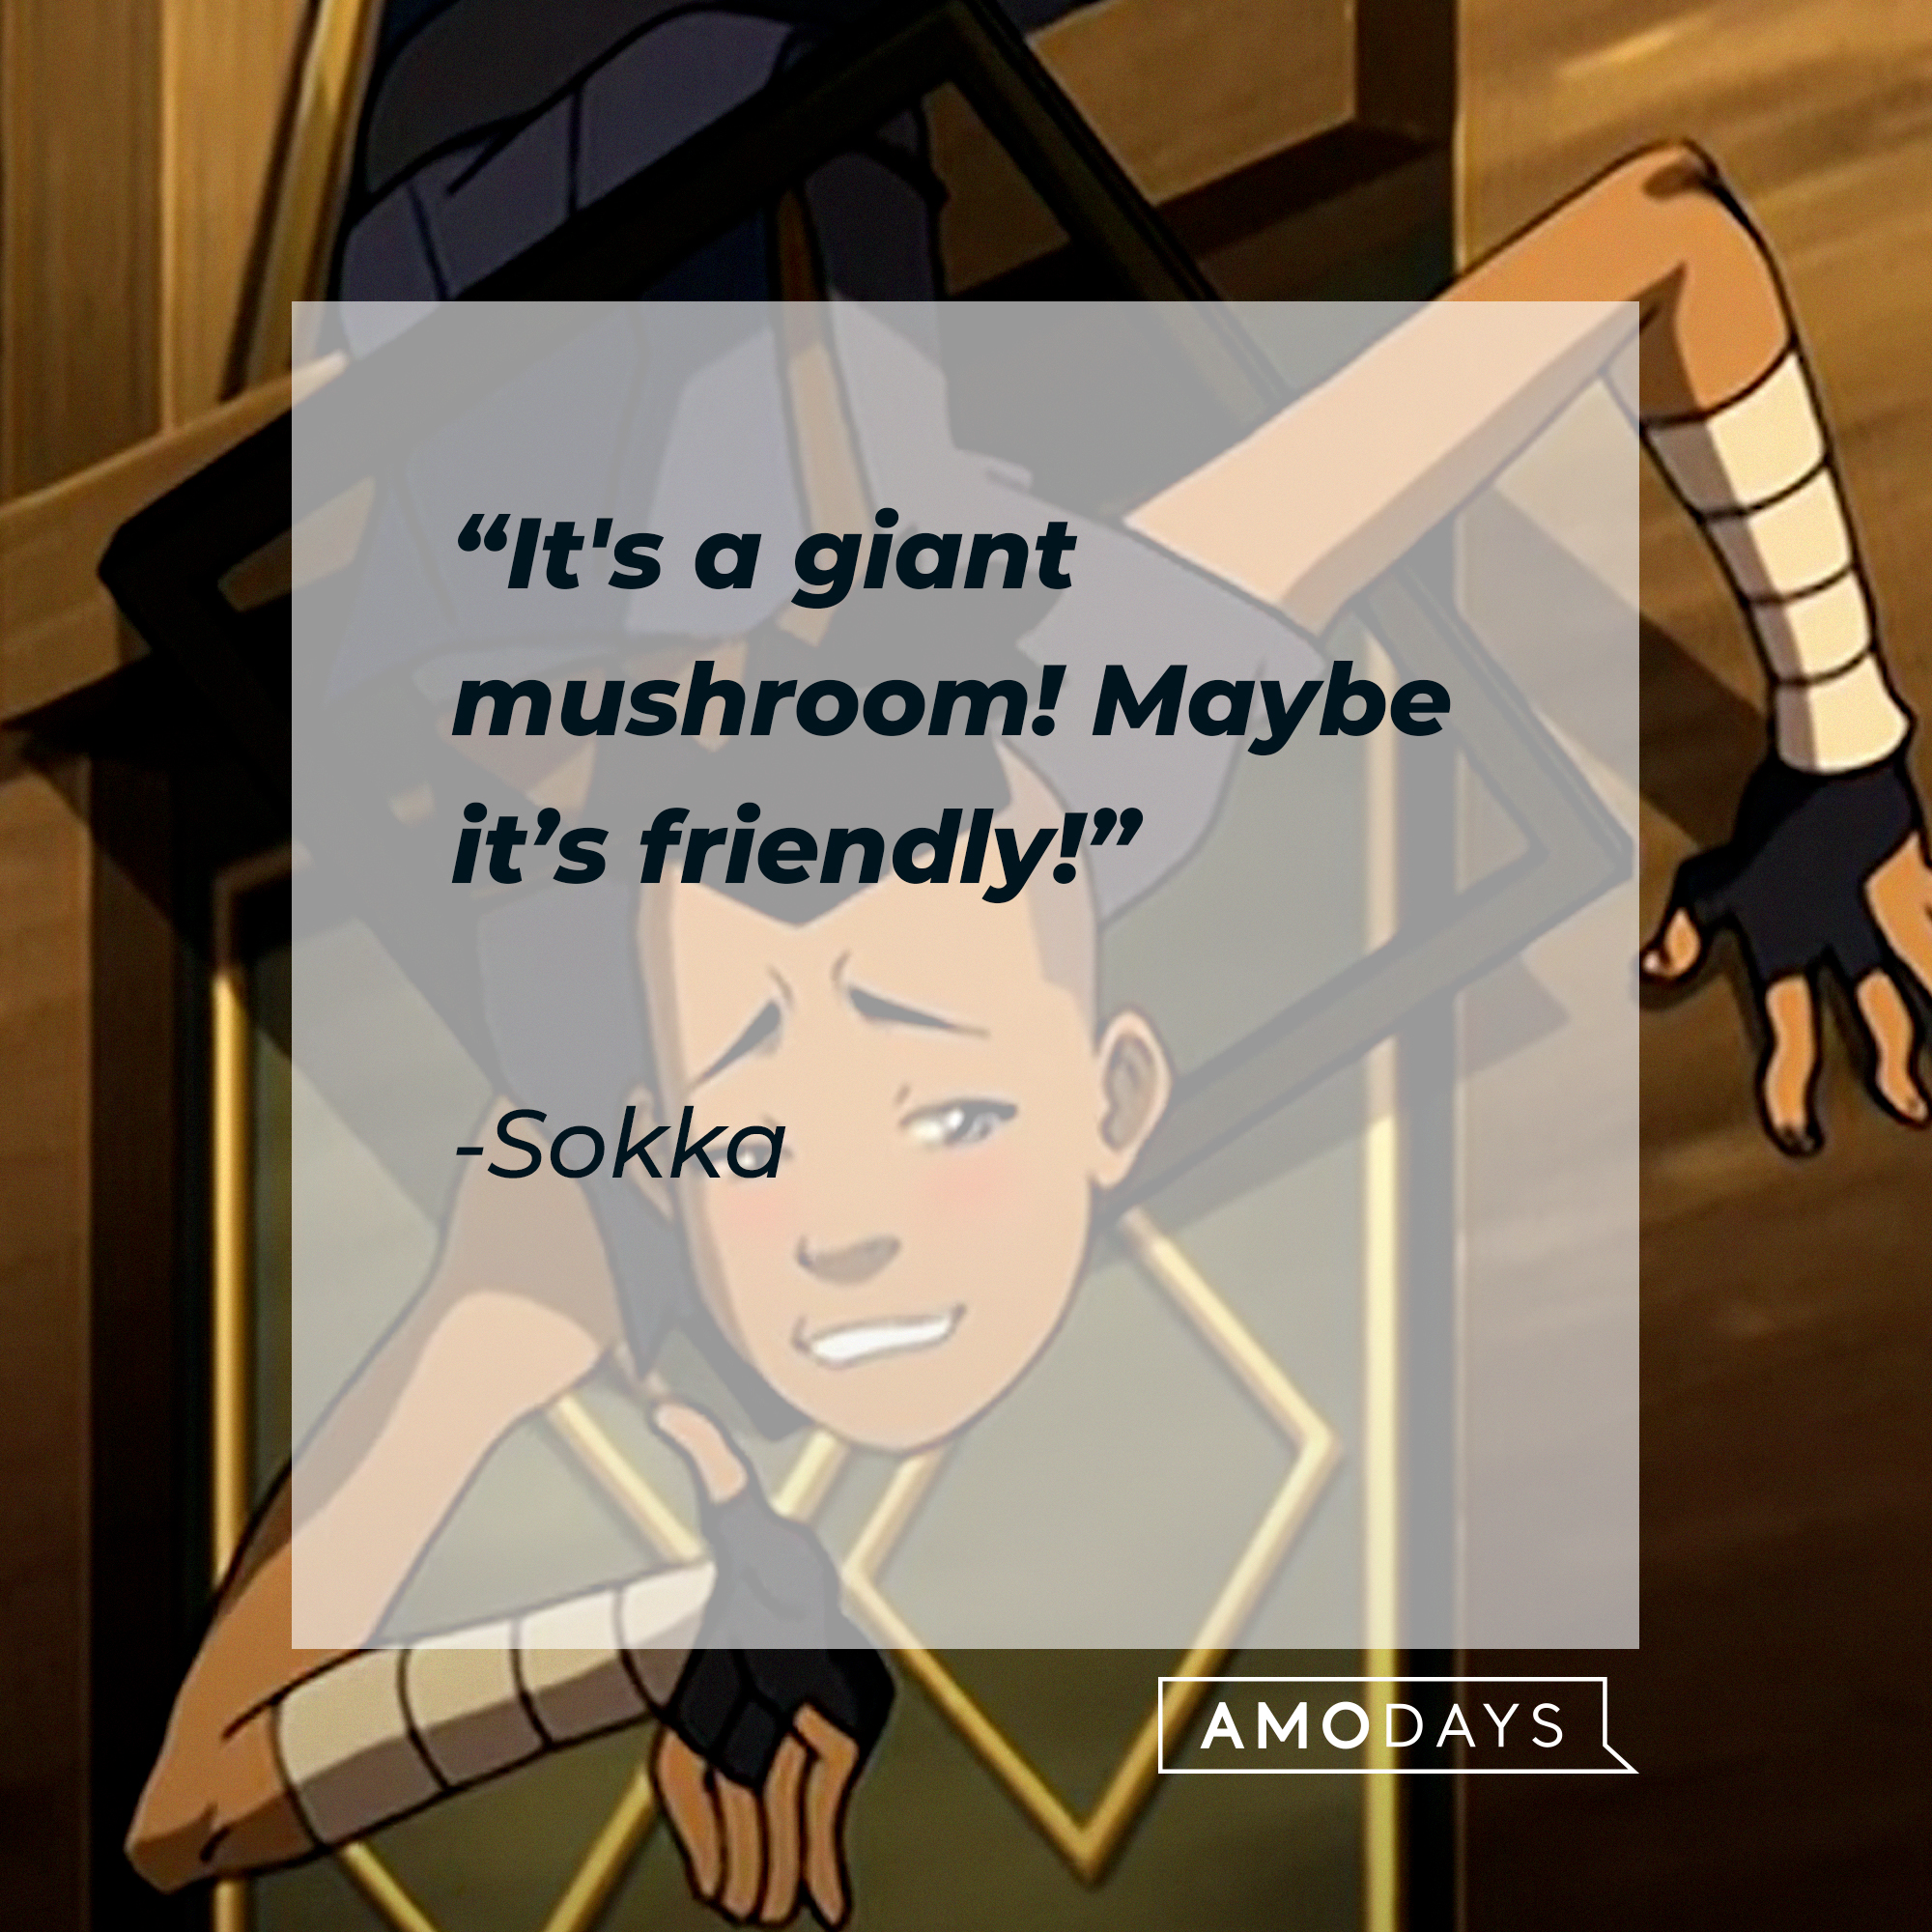 Sokka, with his quote: “It's a giant mushroom! Maybe it’s friendly!” | Source: Youtube.com/TeamAvatar